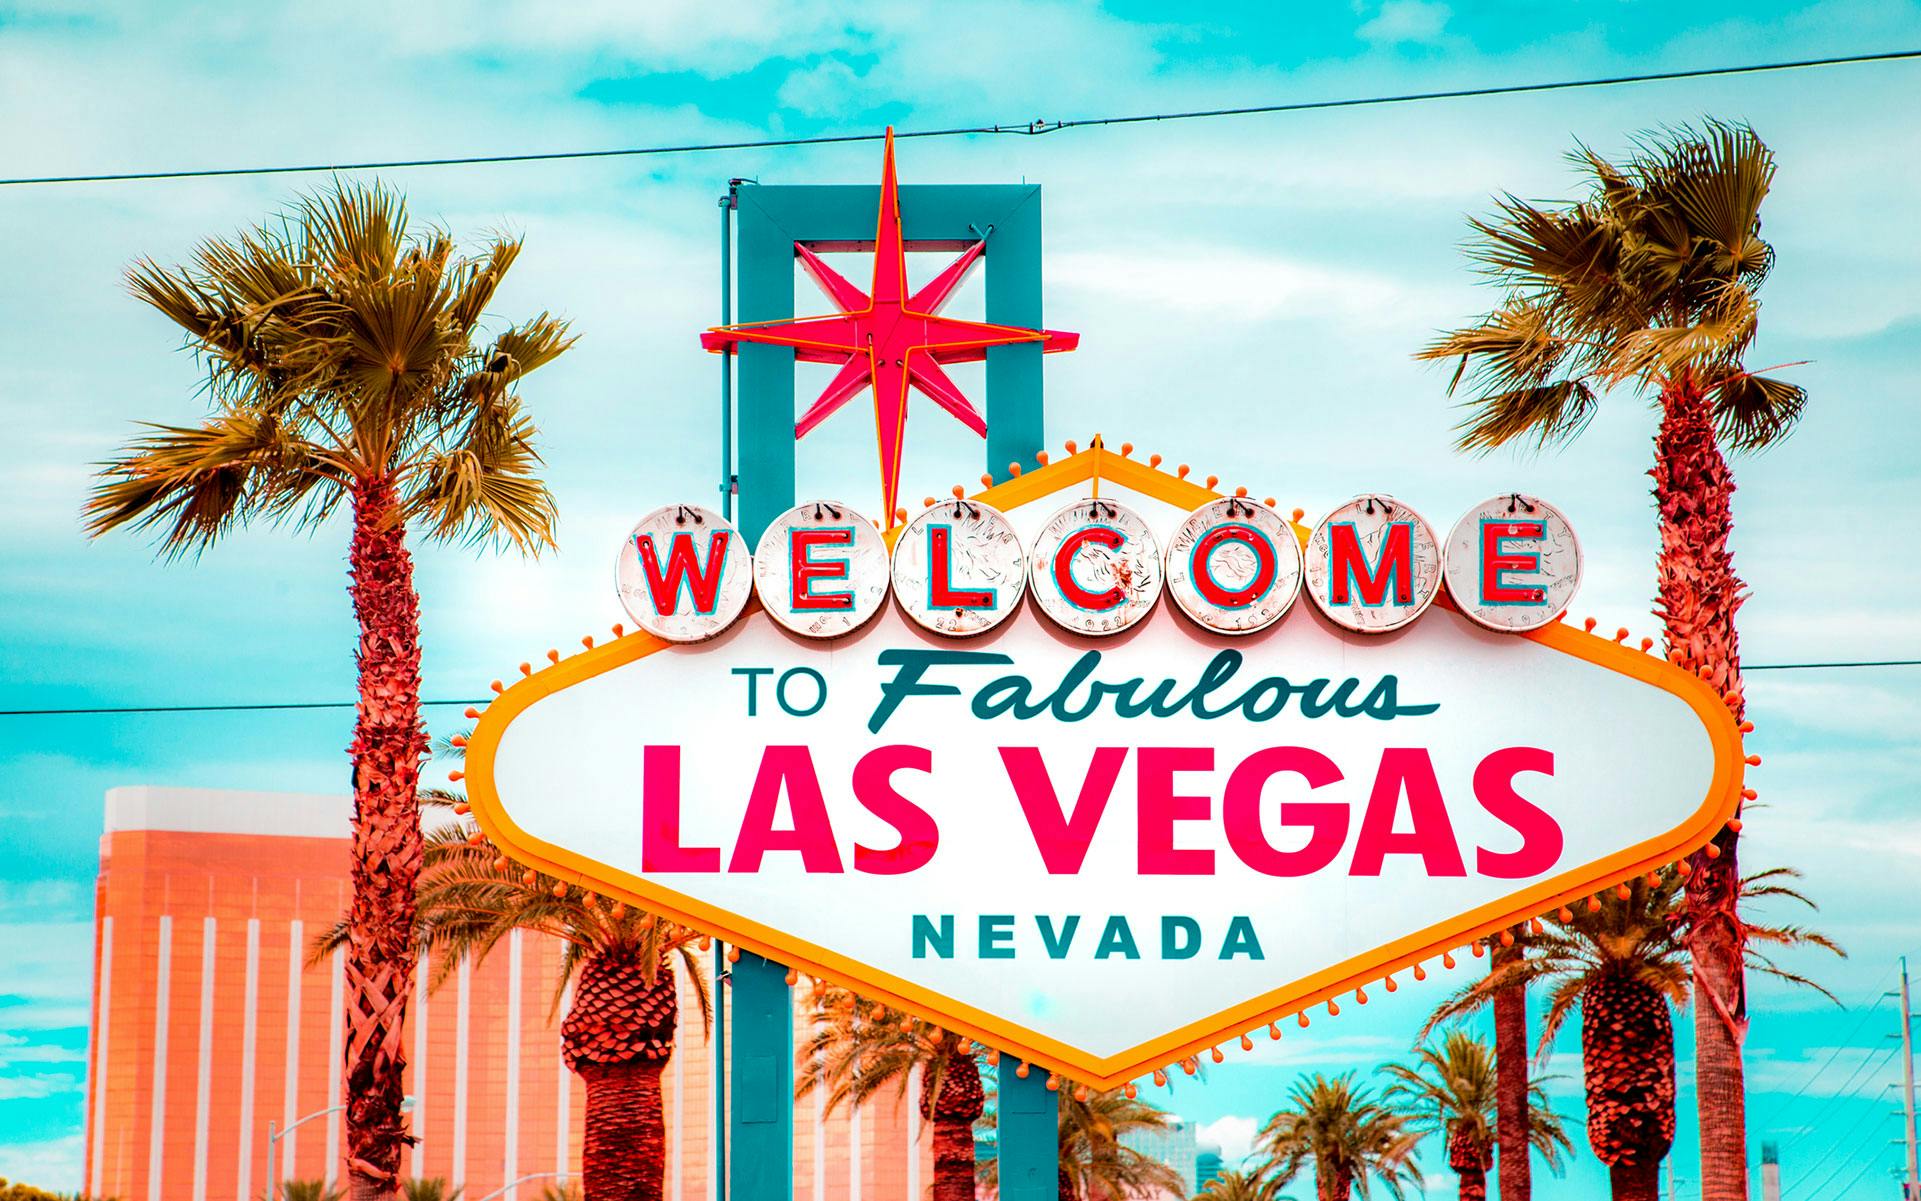 Learning from Las Vegas: 5 lessons from 5 years of legal weed in Sin